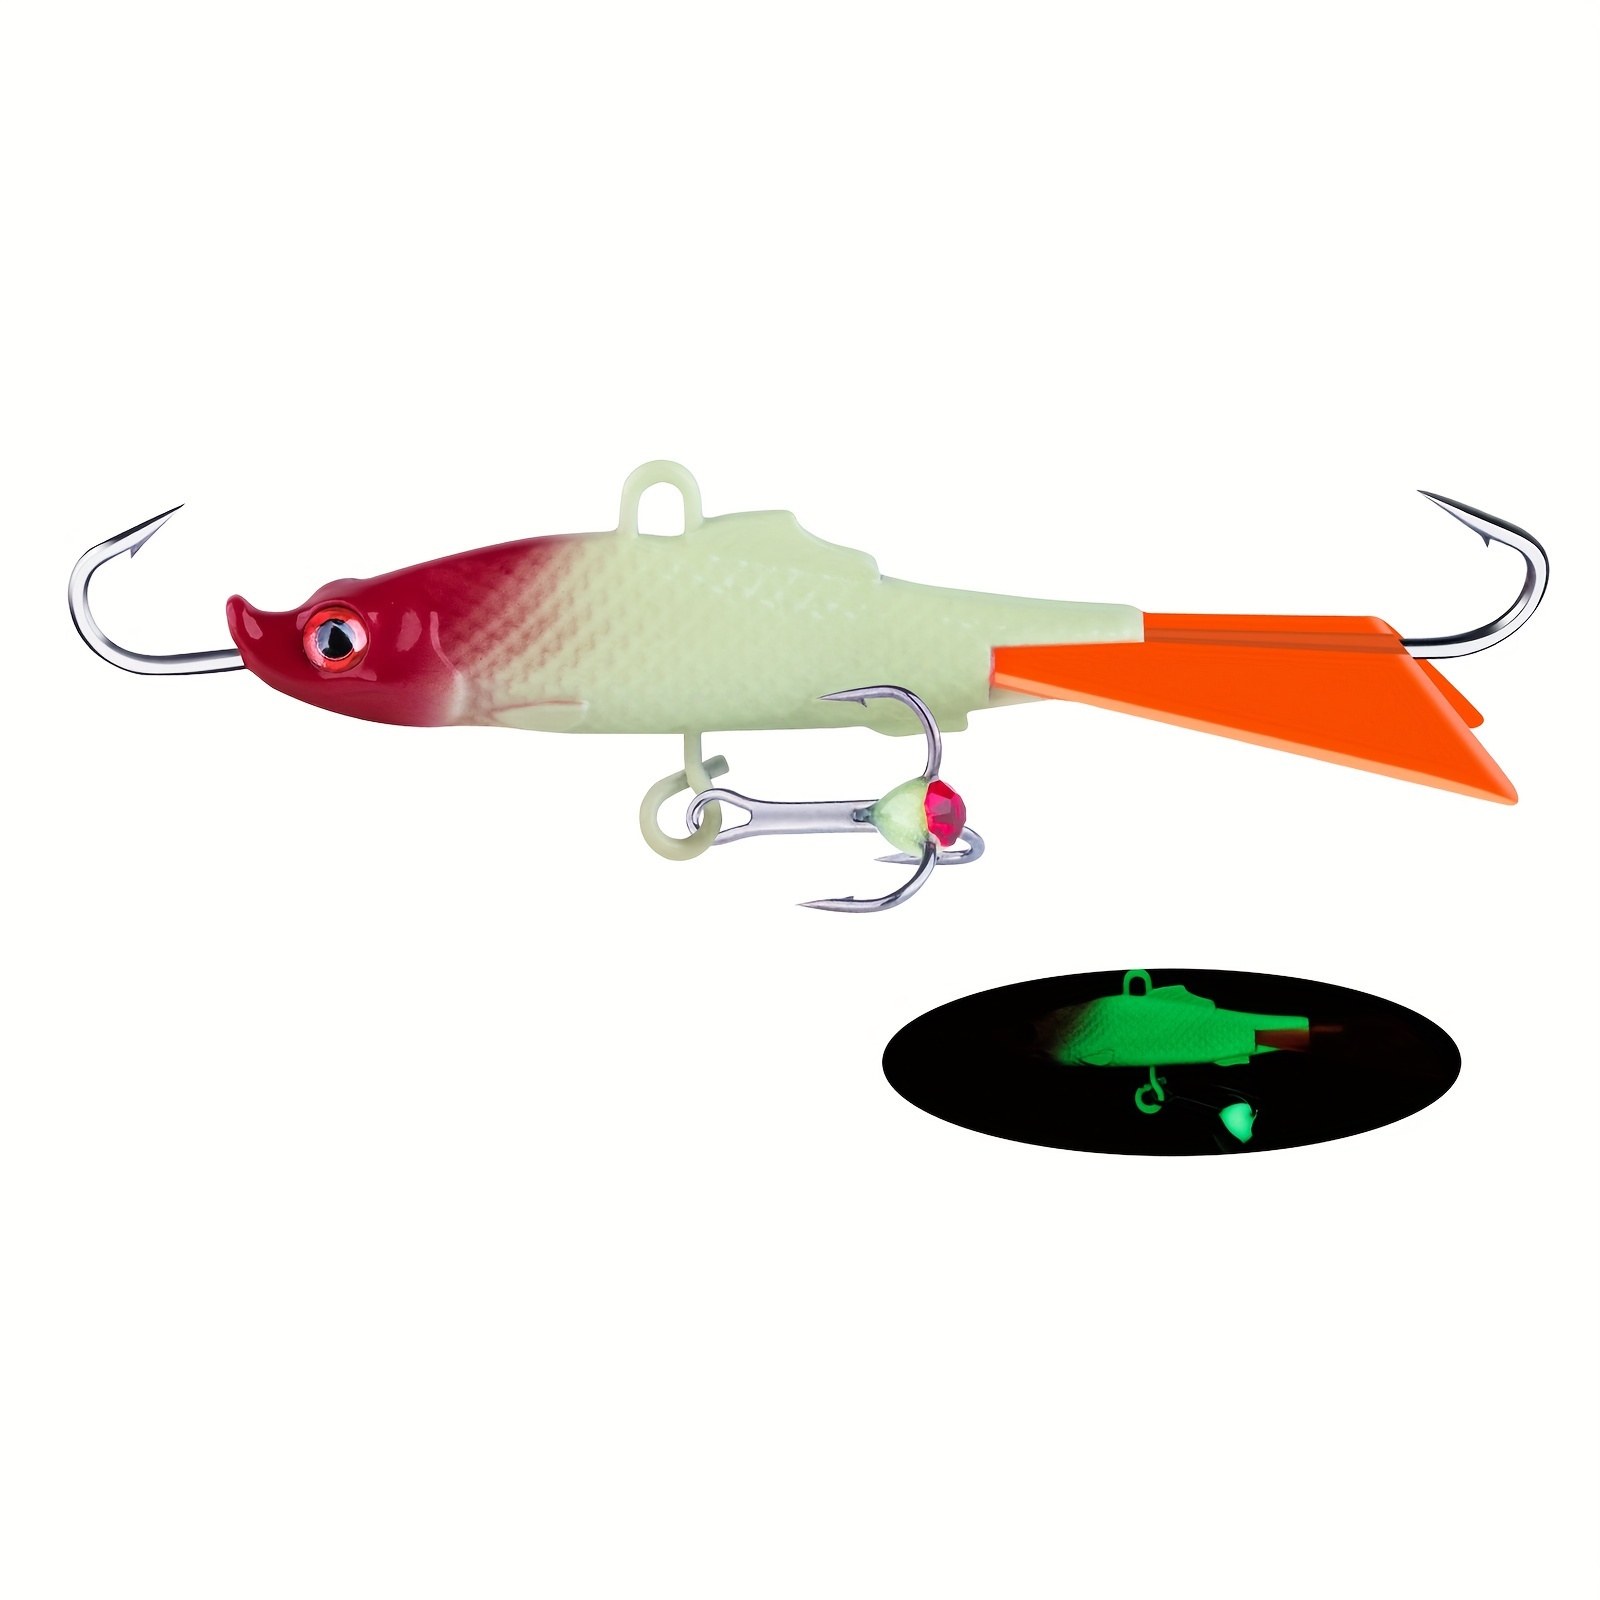 * 1pc Luminous Ice Fishing Jigs, Tungsten Crappie Jigs With 3D Eyes And  Treble Hook For Walleye Perch Bass Panfish Pike Sunfish Bluegill, Suitabl